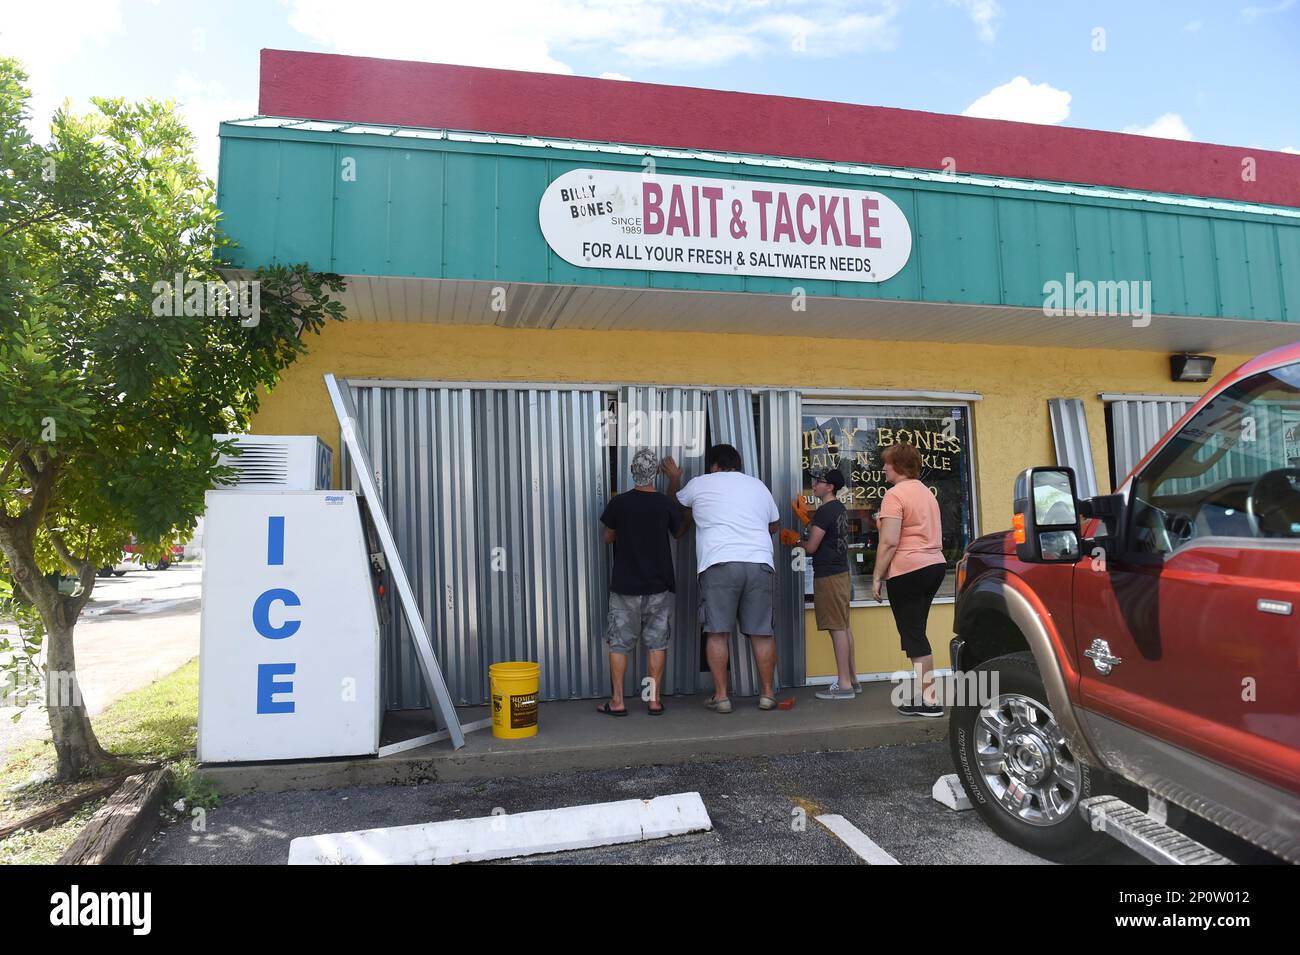 The Hrobak family, of Port St. Lucie, Fla.,install storm shutters ahead of  Hurricane Matthew on Wednesday, Oct. 5, 2016, at Billy Bones Bait-N-Tackle  South in Stuart. We're veterans at this, said Bruce